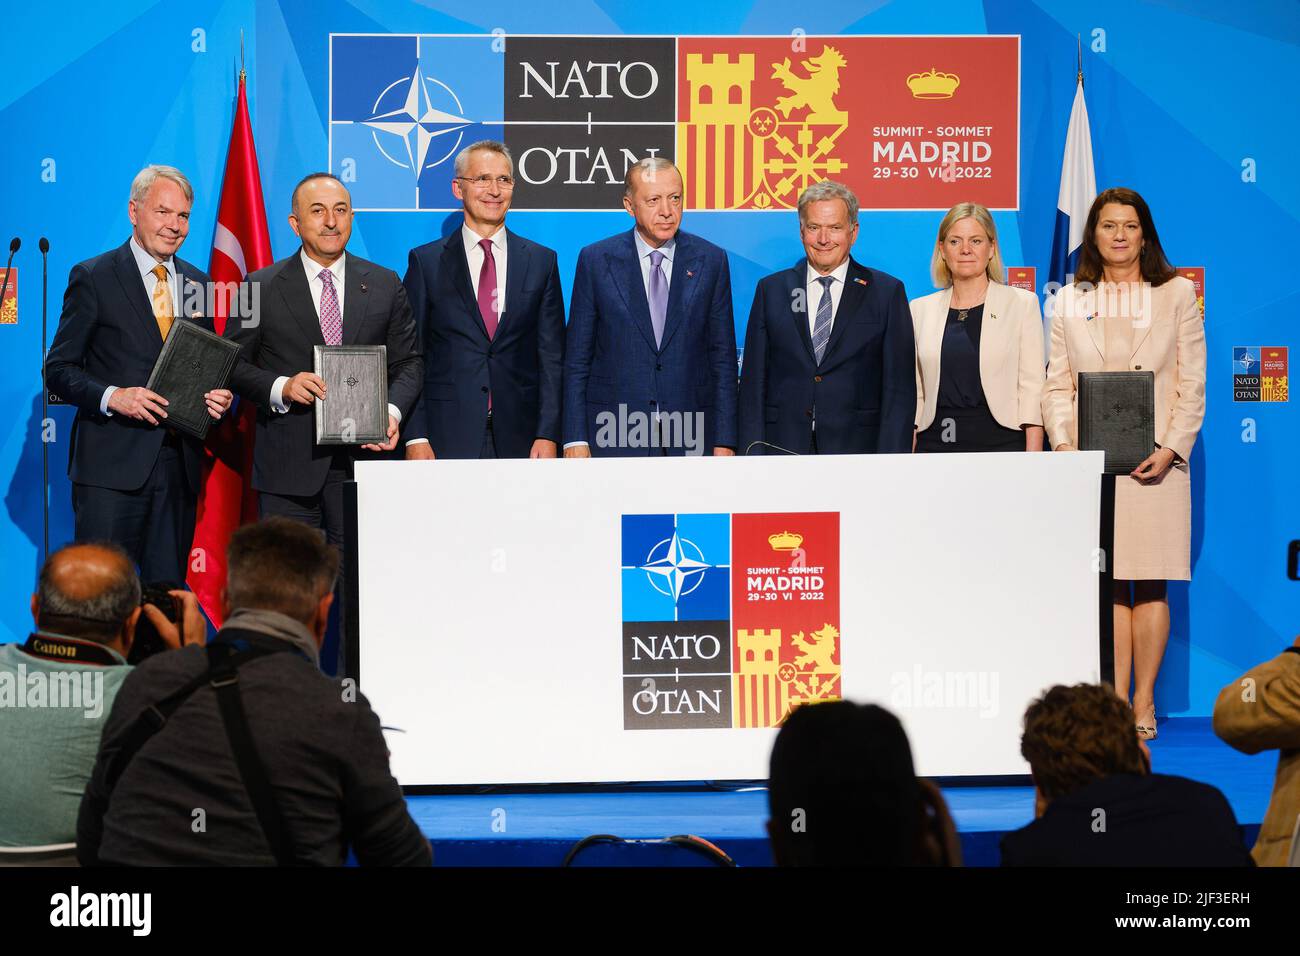 Madrid, Spain. 29th June, 2022. Pekka Haavisto, Minister of Foreign Affairs of Finland, Mevlut Cavusoglu, Minister of Foreign Affairs of Turkey, NATO Secretary-General Jens Stoltenberg, President Recep Tayyip Erdogan of Turkey, President Sauli Niinisto of Finland, and Prime Minister Magdalena Andersson of Sweden and Ann Linde of Minister of Foreign Affairs of Sweden, during a signing ceremony on Tuesday, June 28, 2022, paving the way for Finnish and Swedish NATO membership. Photo via NATO/UPI Credit: UPI/Alamy Live News Stock Photo